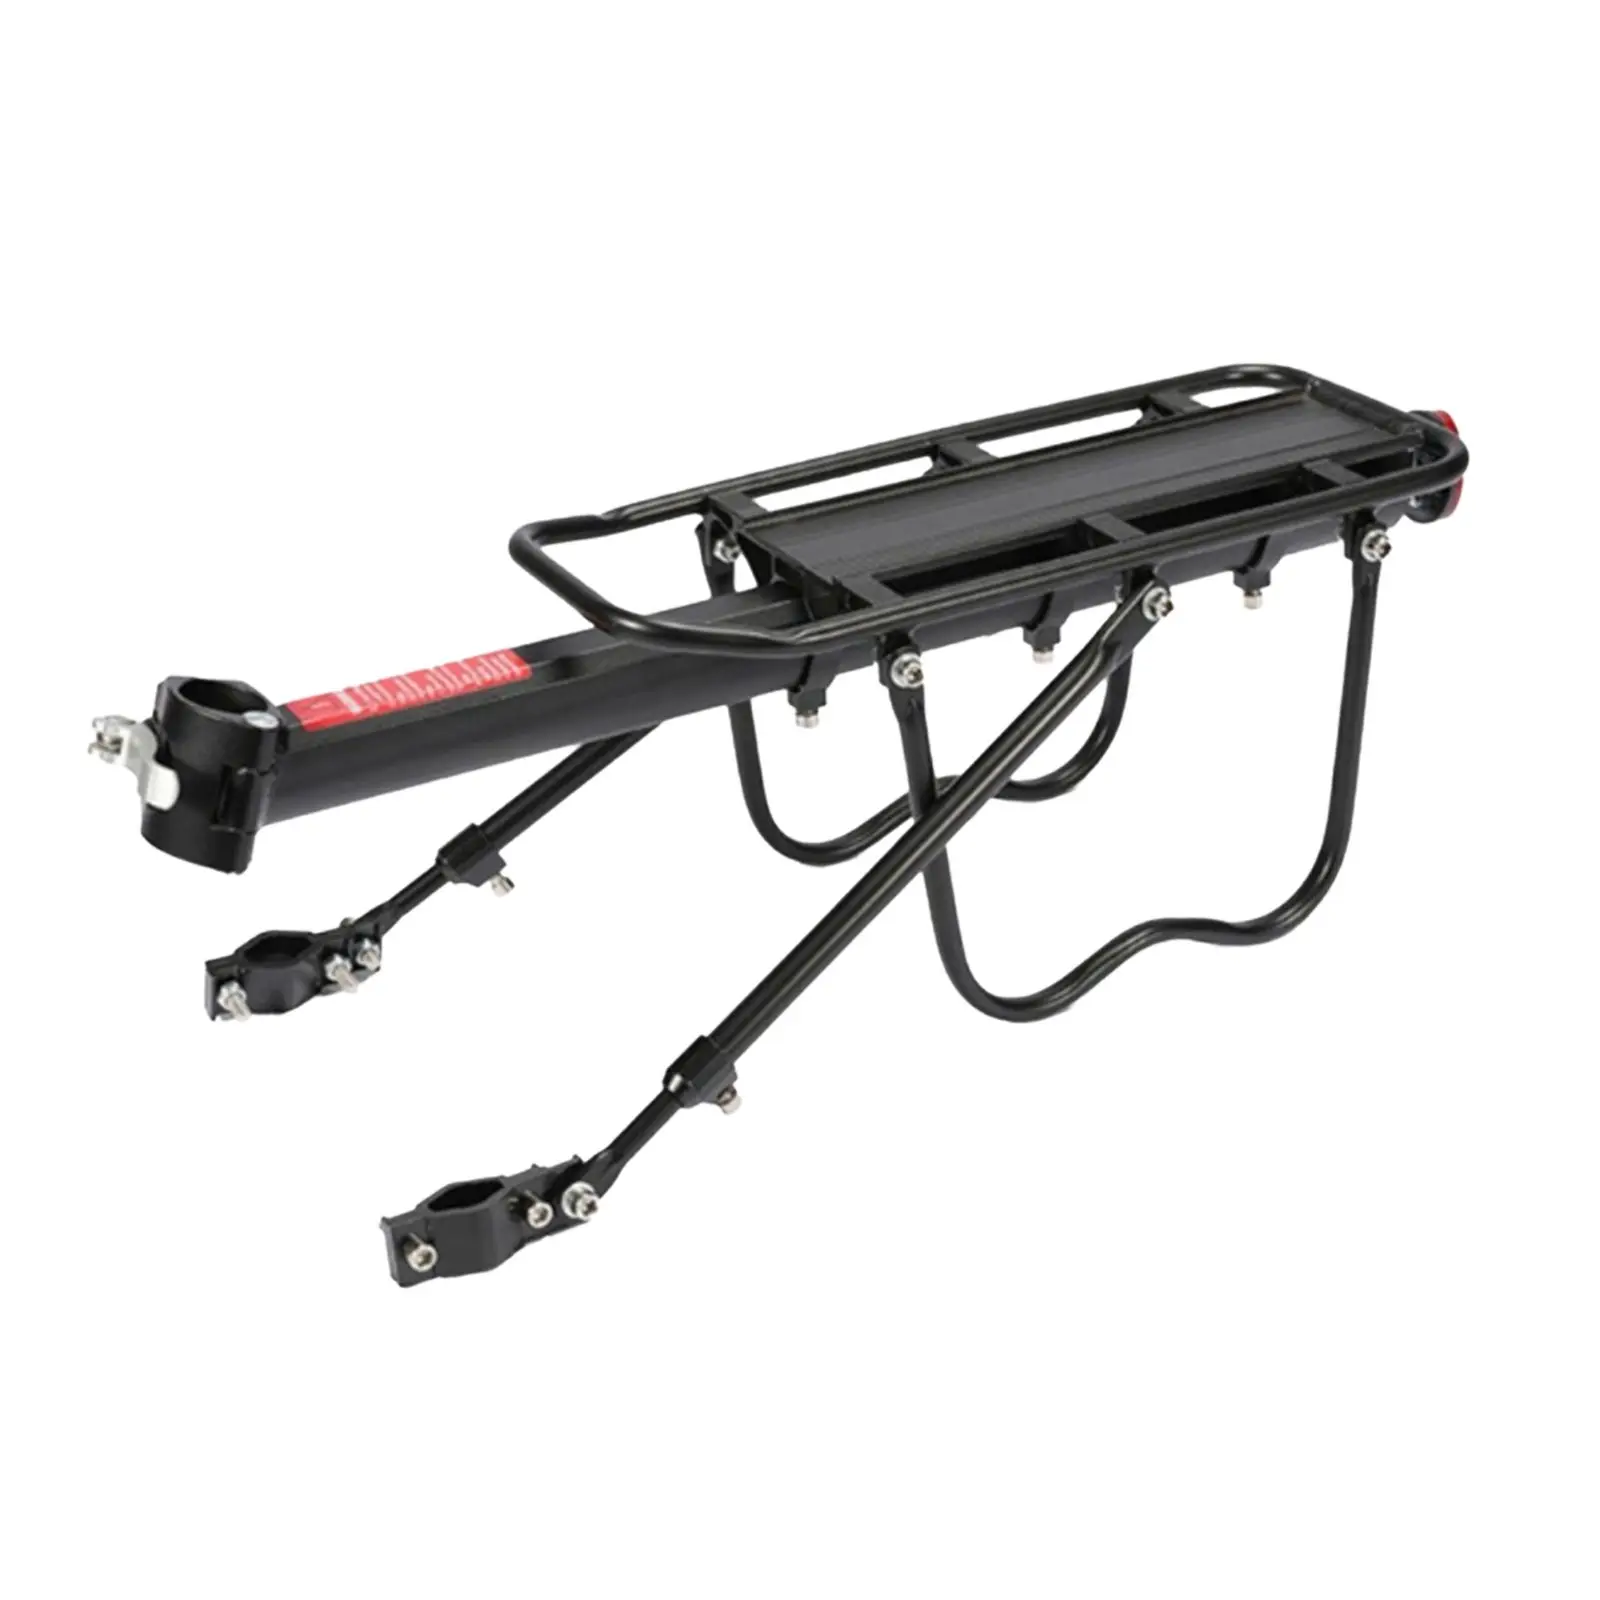 24-29 inch Bicycle Carrier Bike Luggage Cargo Rear Rack Aluminum Alloy Shelf Holder Stand Support Easy to Install